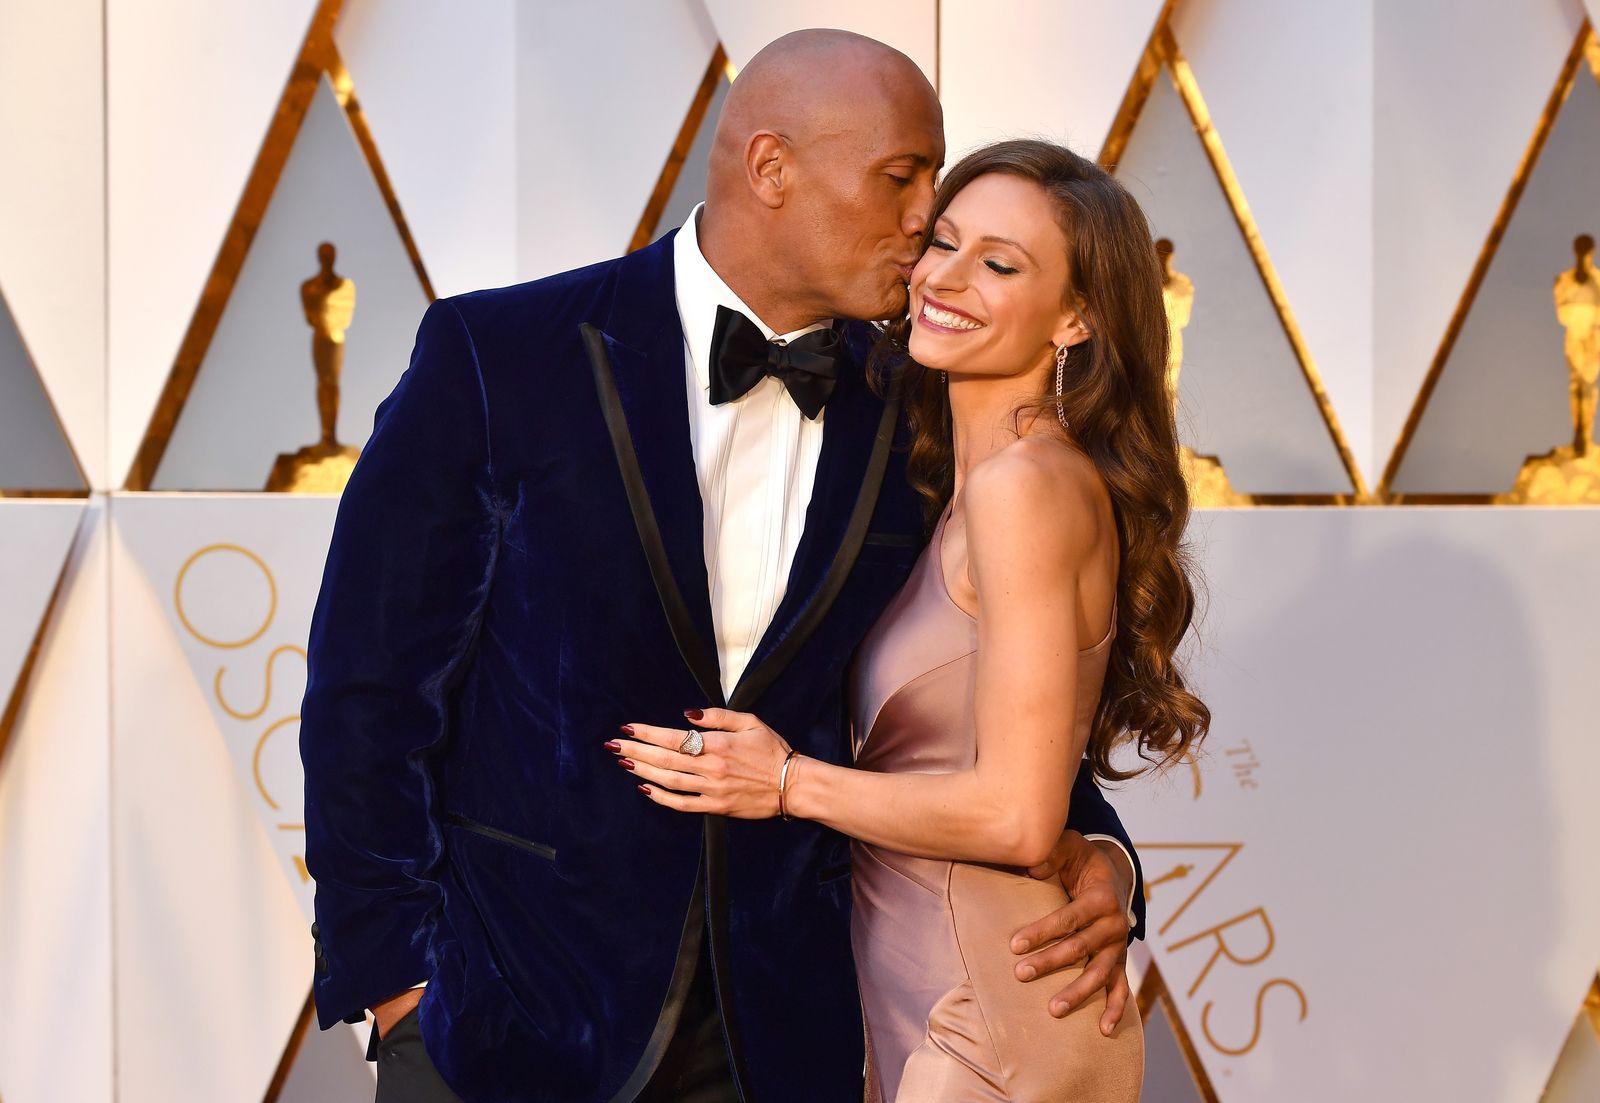 Dwayne Johnson and Lauren Hashian at the 89th Annual Academy Awards on February 26, 2017, in Hollywood, California | Photo: Jeff Kravitz/FilmMagic/Getty Images